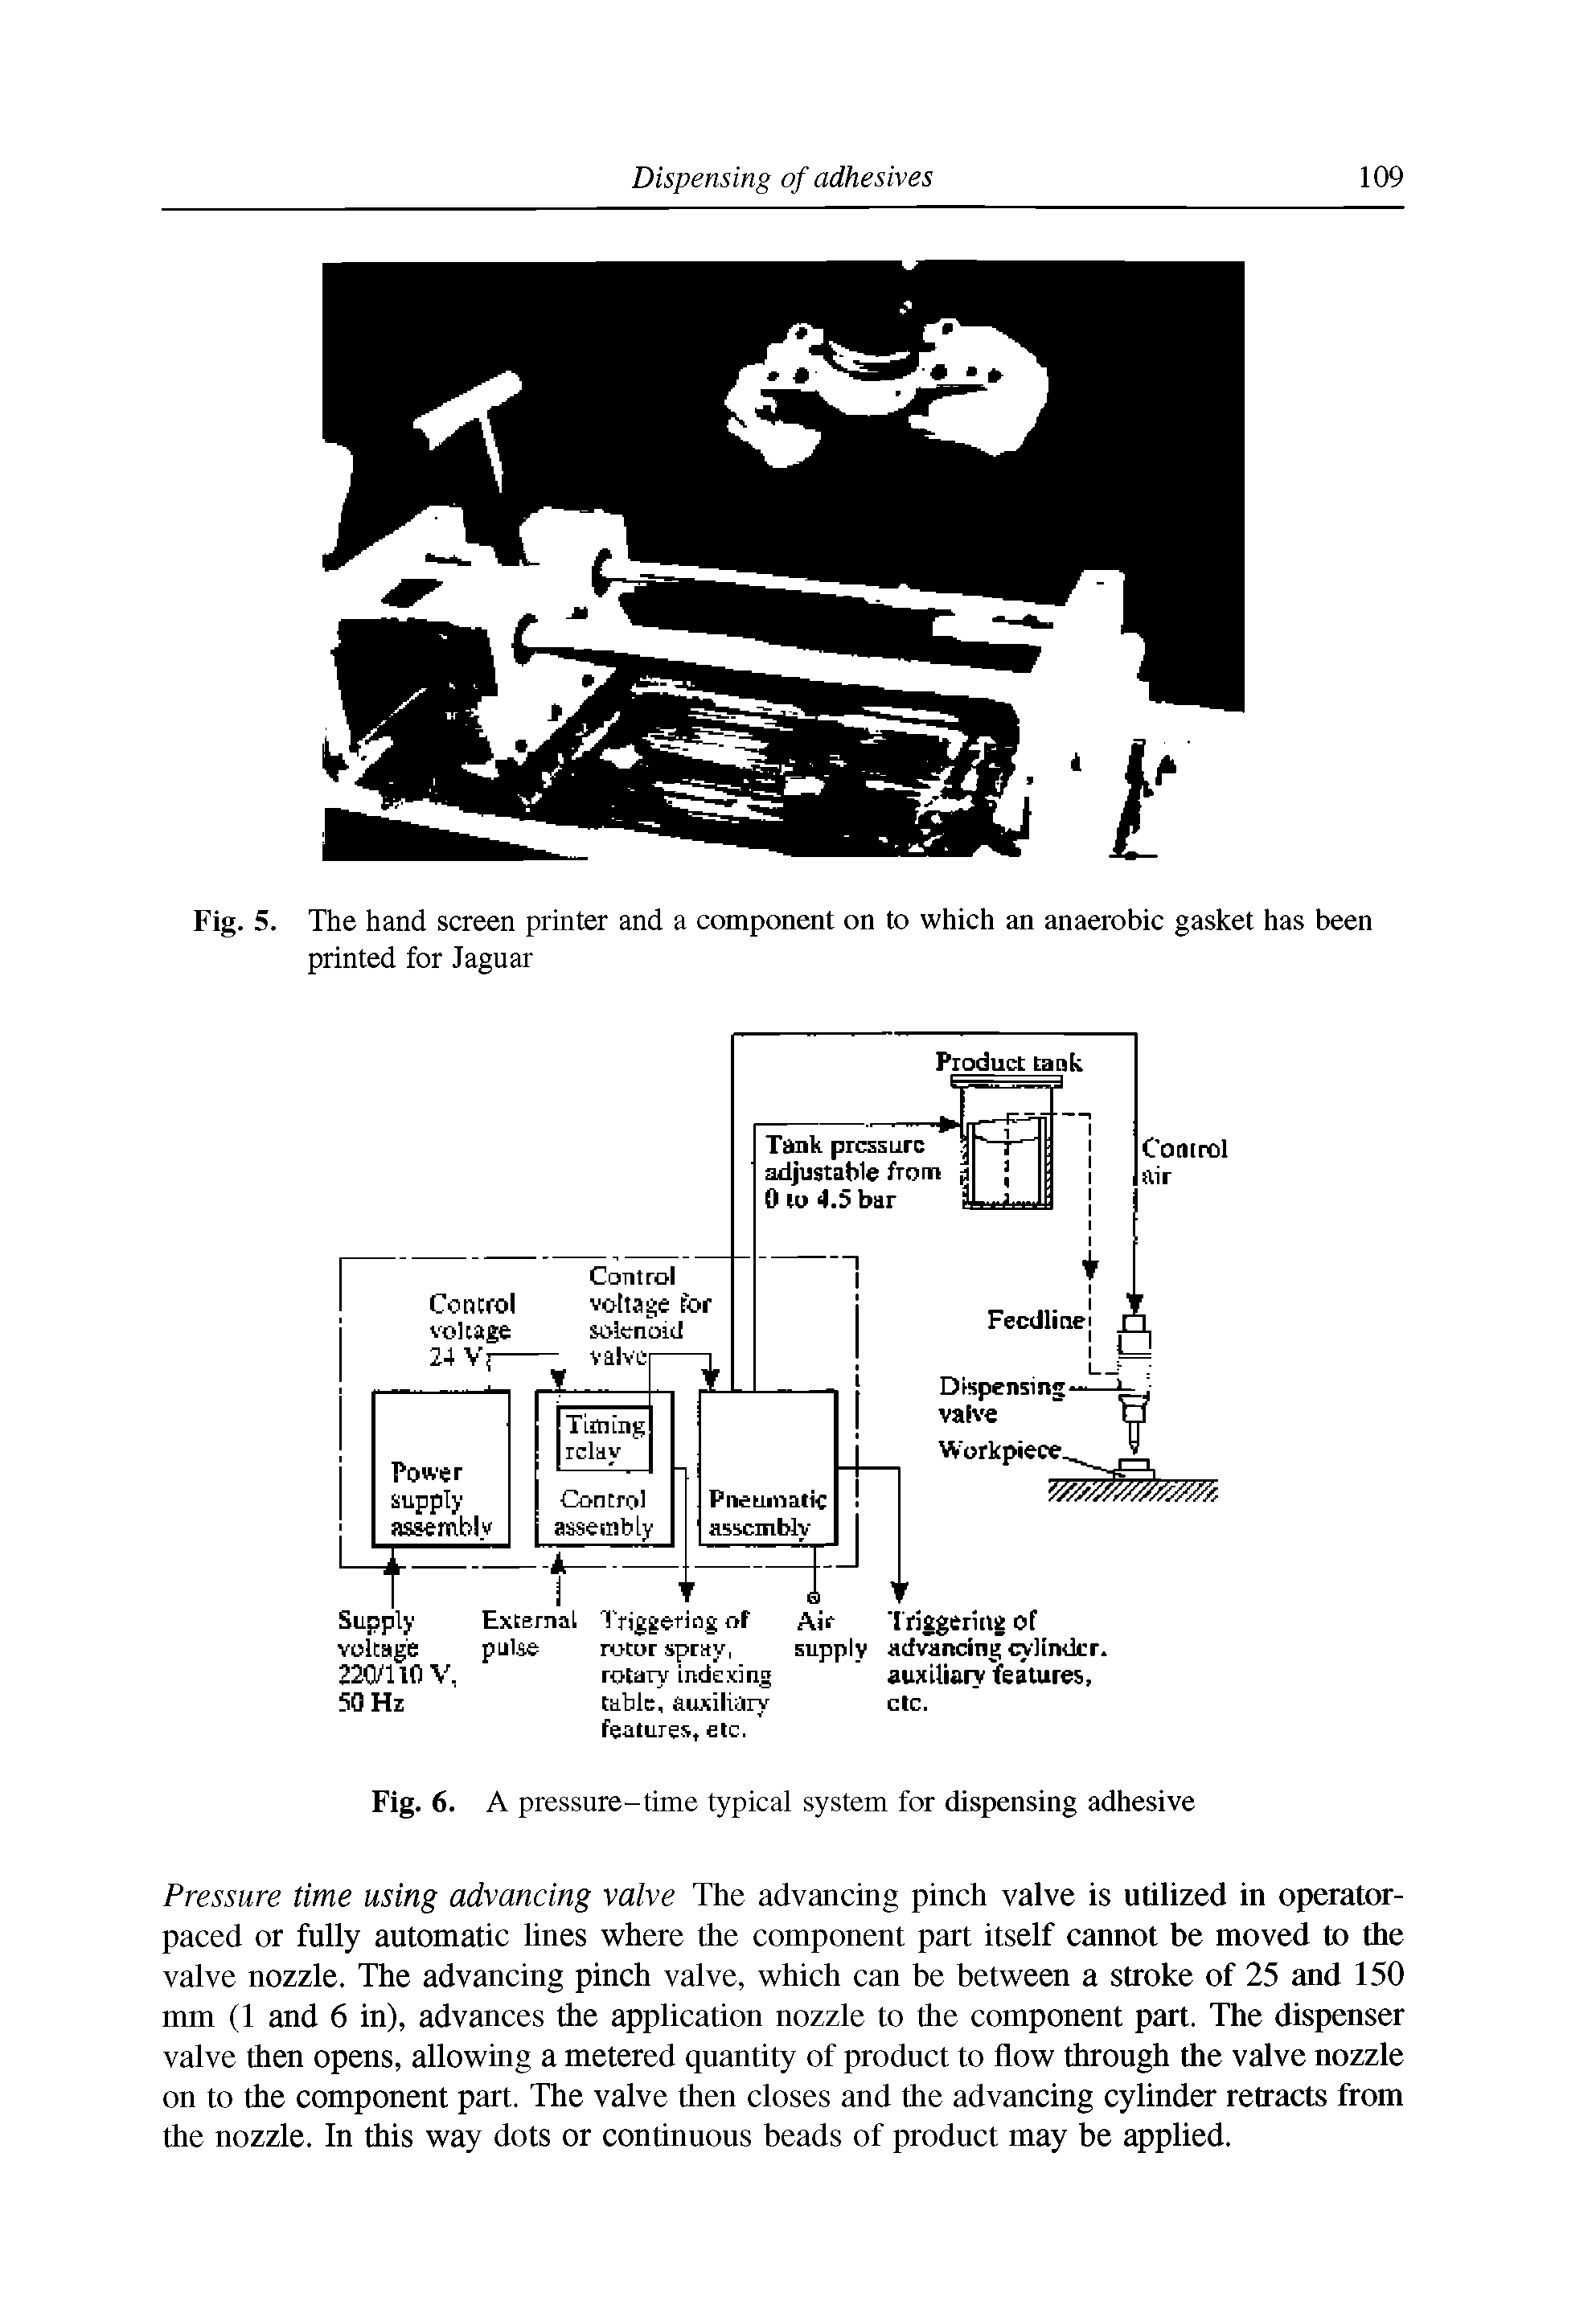 Fig. 6. A pressure-time typical system for dispensing adhesive...